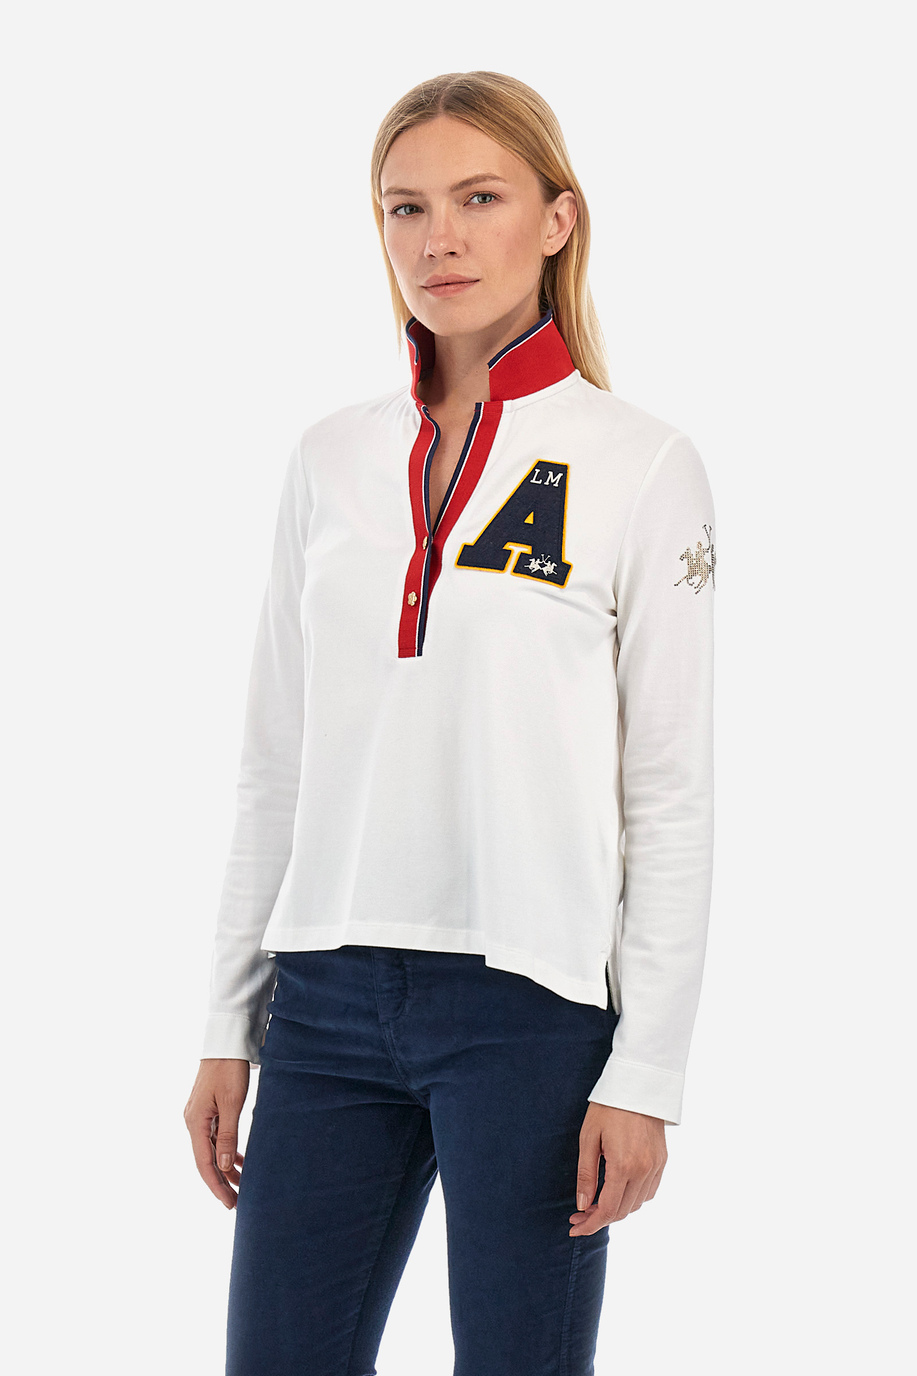 Women's polo shirt in a regular fit- Wendolyn - Polo Shirts | La Martina - Official Online Shop